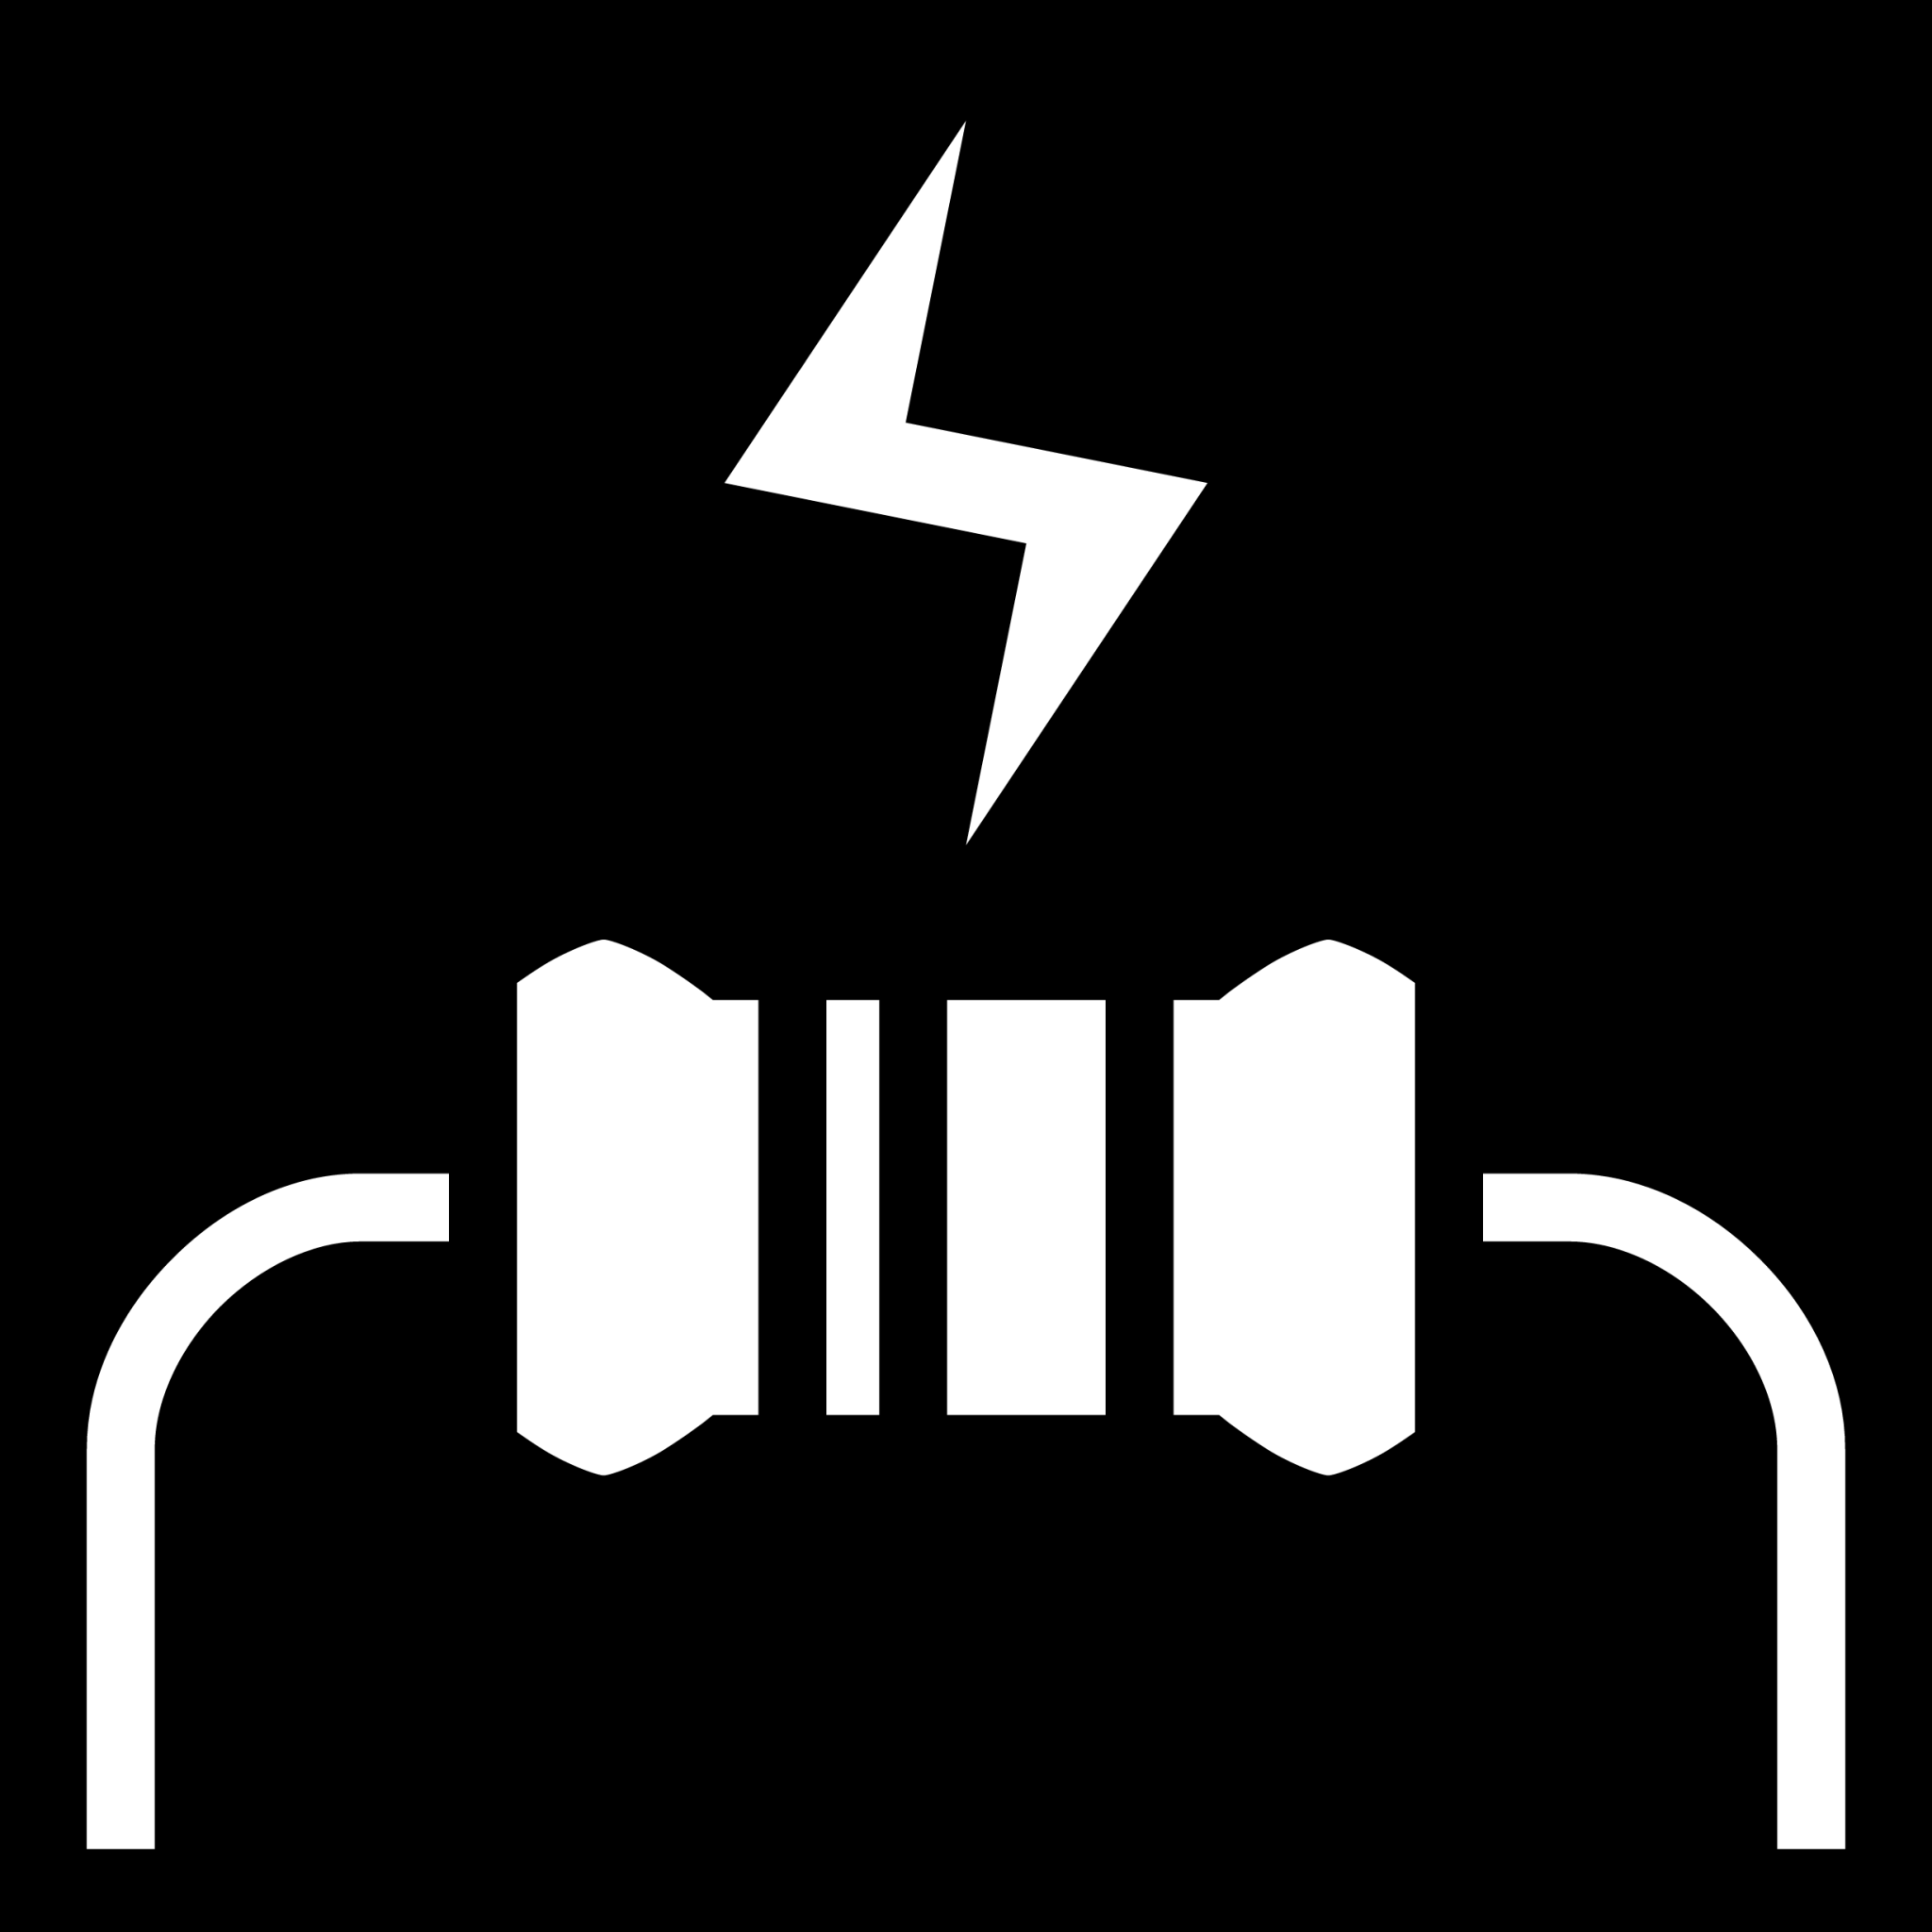 electrical resistance icon